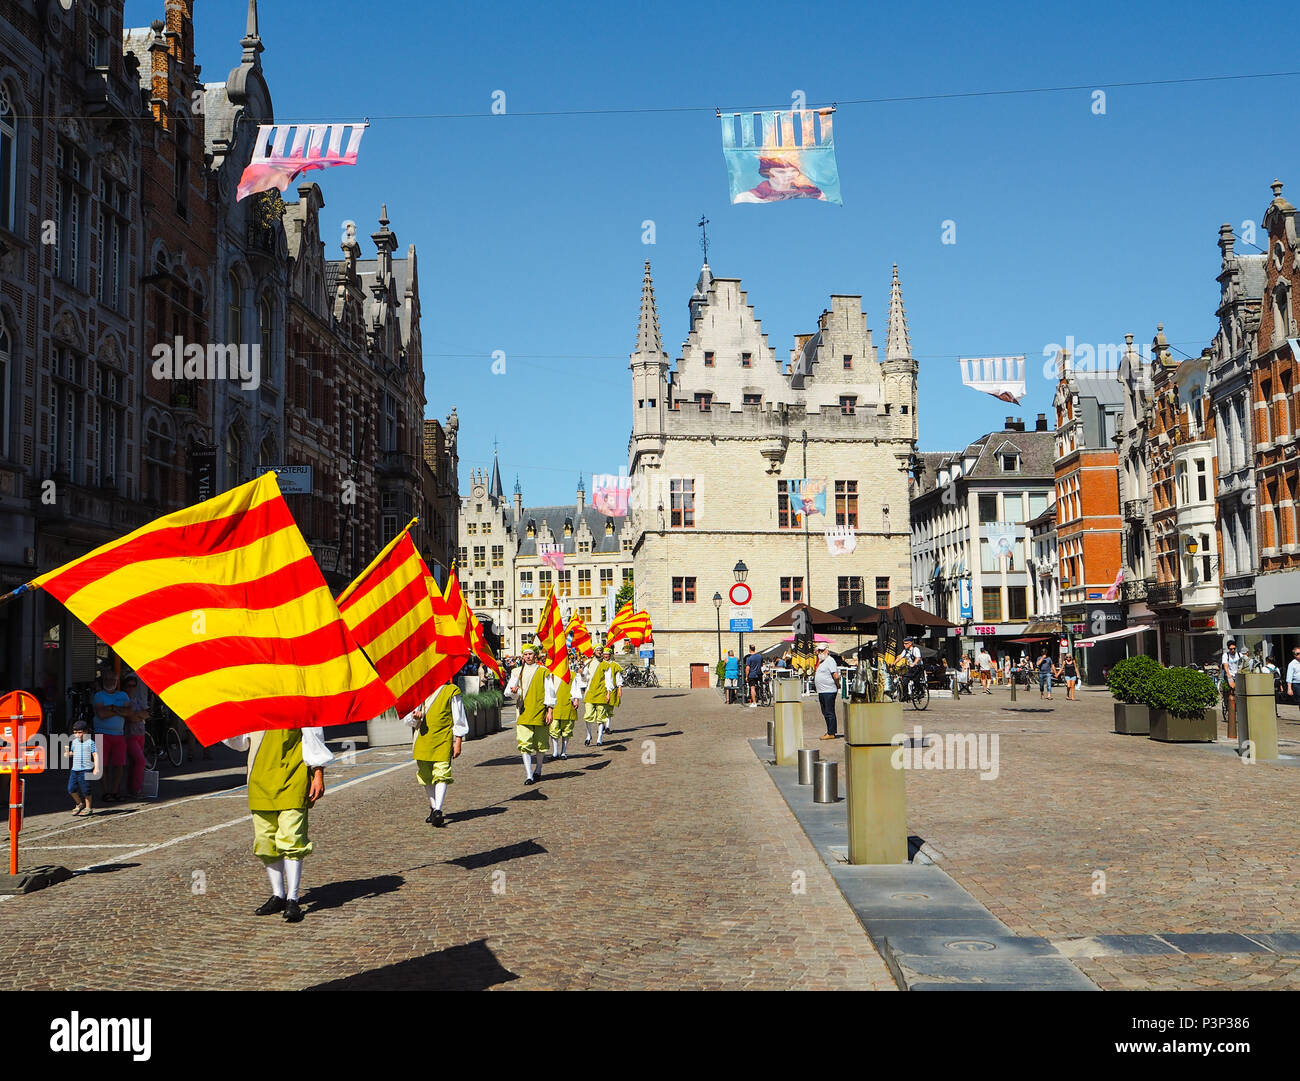 Mechelen, Belgium - May 2018: Men participating in the Hanswijk procession, carrying the city flag of Mechelen while walking on the Ijzerenleen Stock Photo